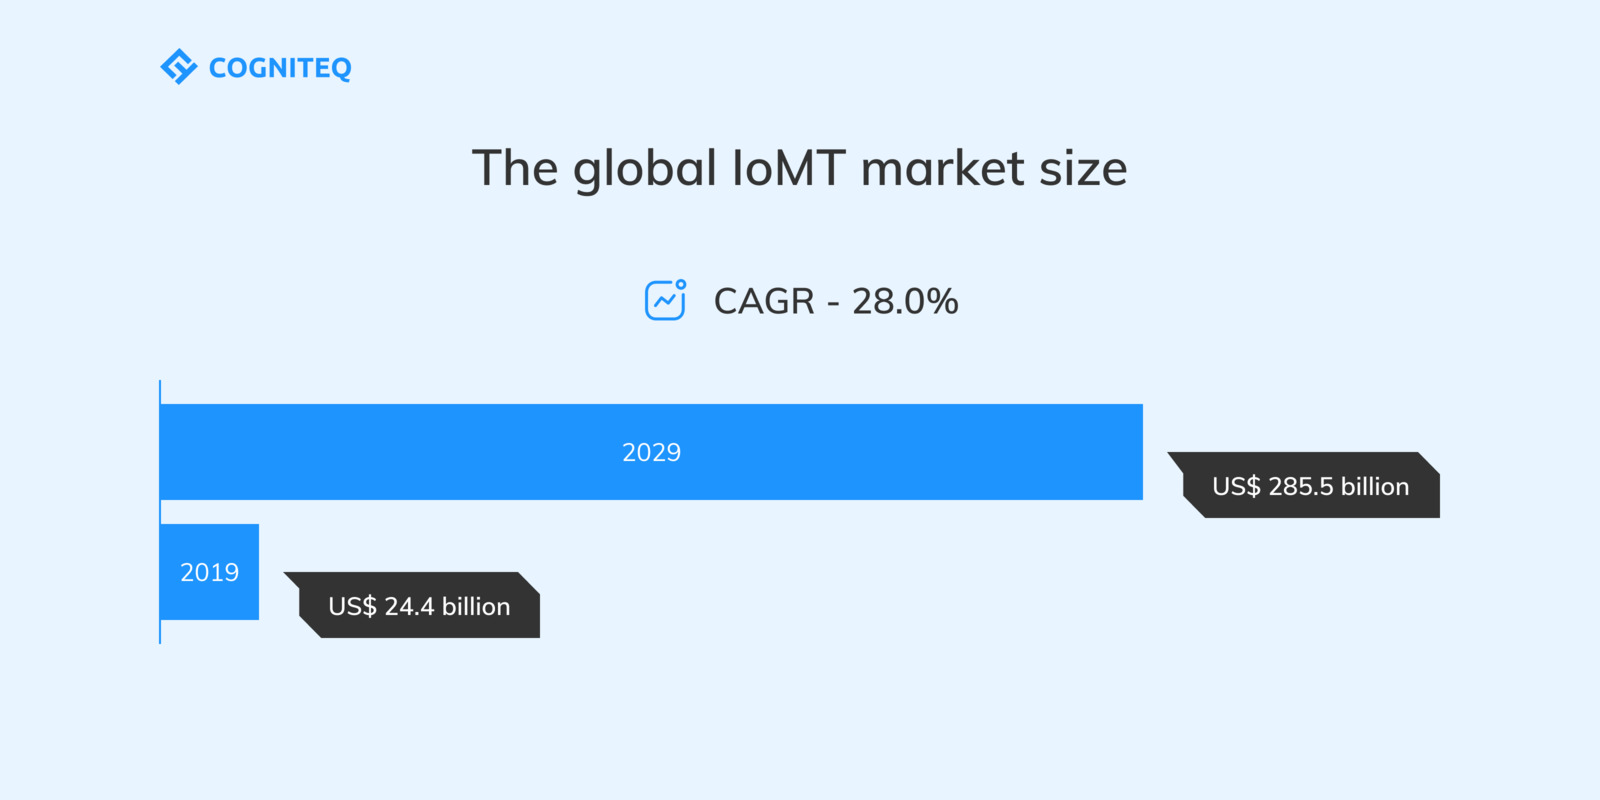  The global internet-of-medical-things (IoMT) market size